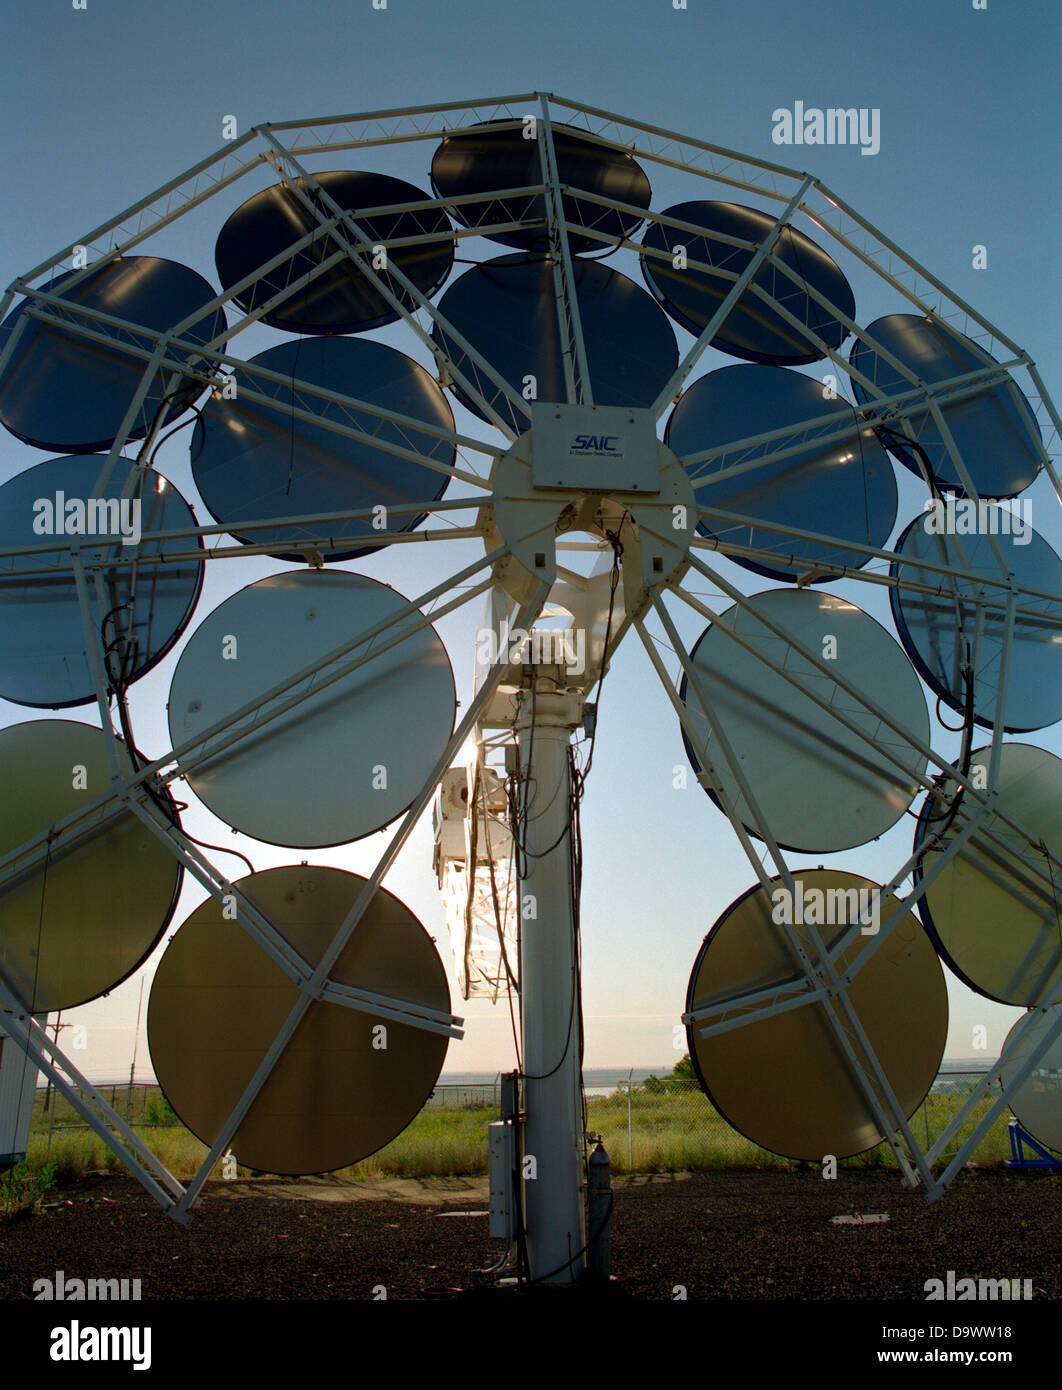 Stirling Solar power systems solar dish engine June 12, 1996 in Golden, Colorado. The dish produces electricity uses mirrors to focus sunlight onto a thermal receiver. The heat is used to run a Stirling heat engine, which drives an electric generator. Stock Photo